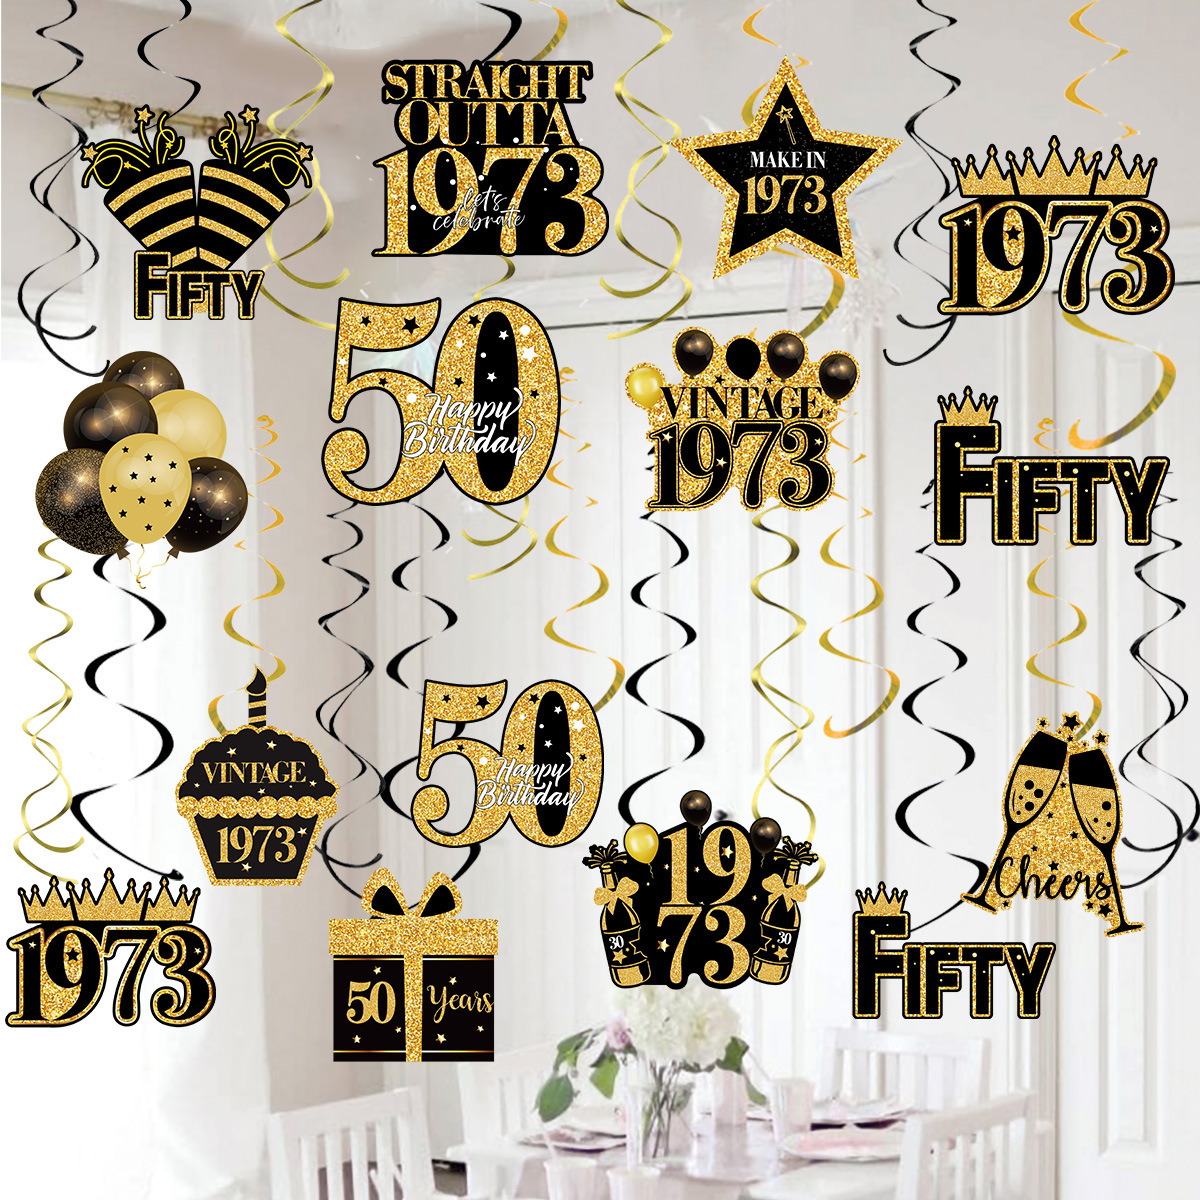 Happy 50th Birthday - Guest Book: Great for 50th Birthday - Vintage Party -  Black Birthday Decorations, Gifts for men and women - 50 Years - Retro